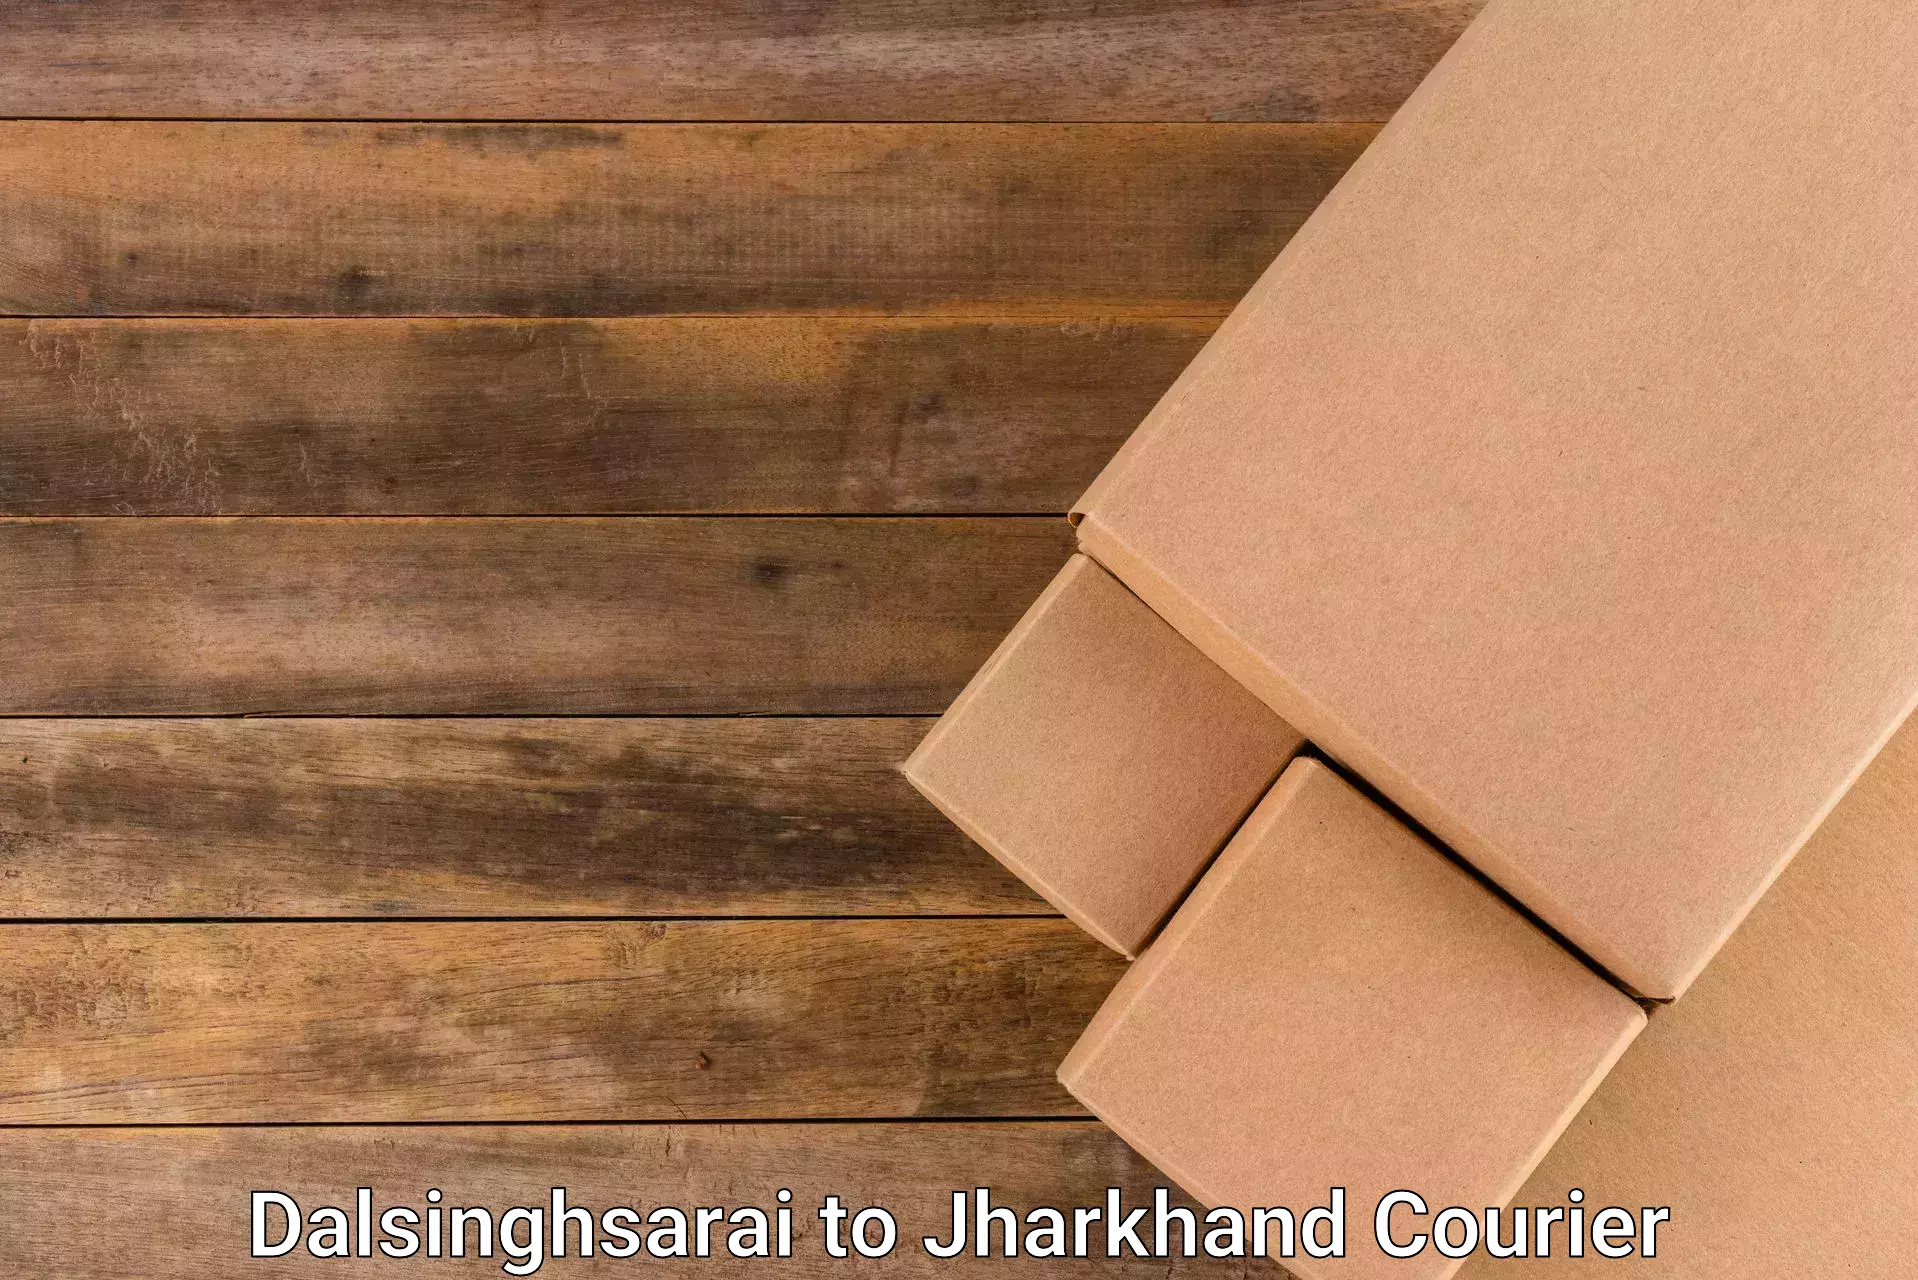 Package delivery network Dalsinghsarai to Jamshedpur